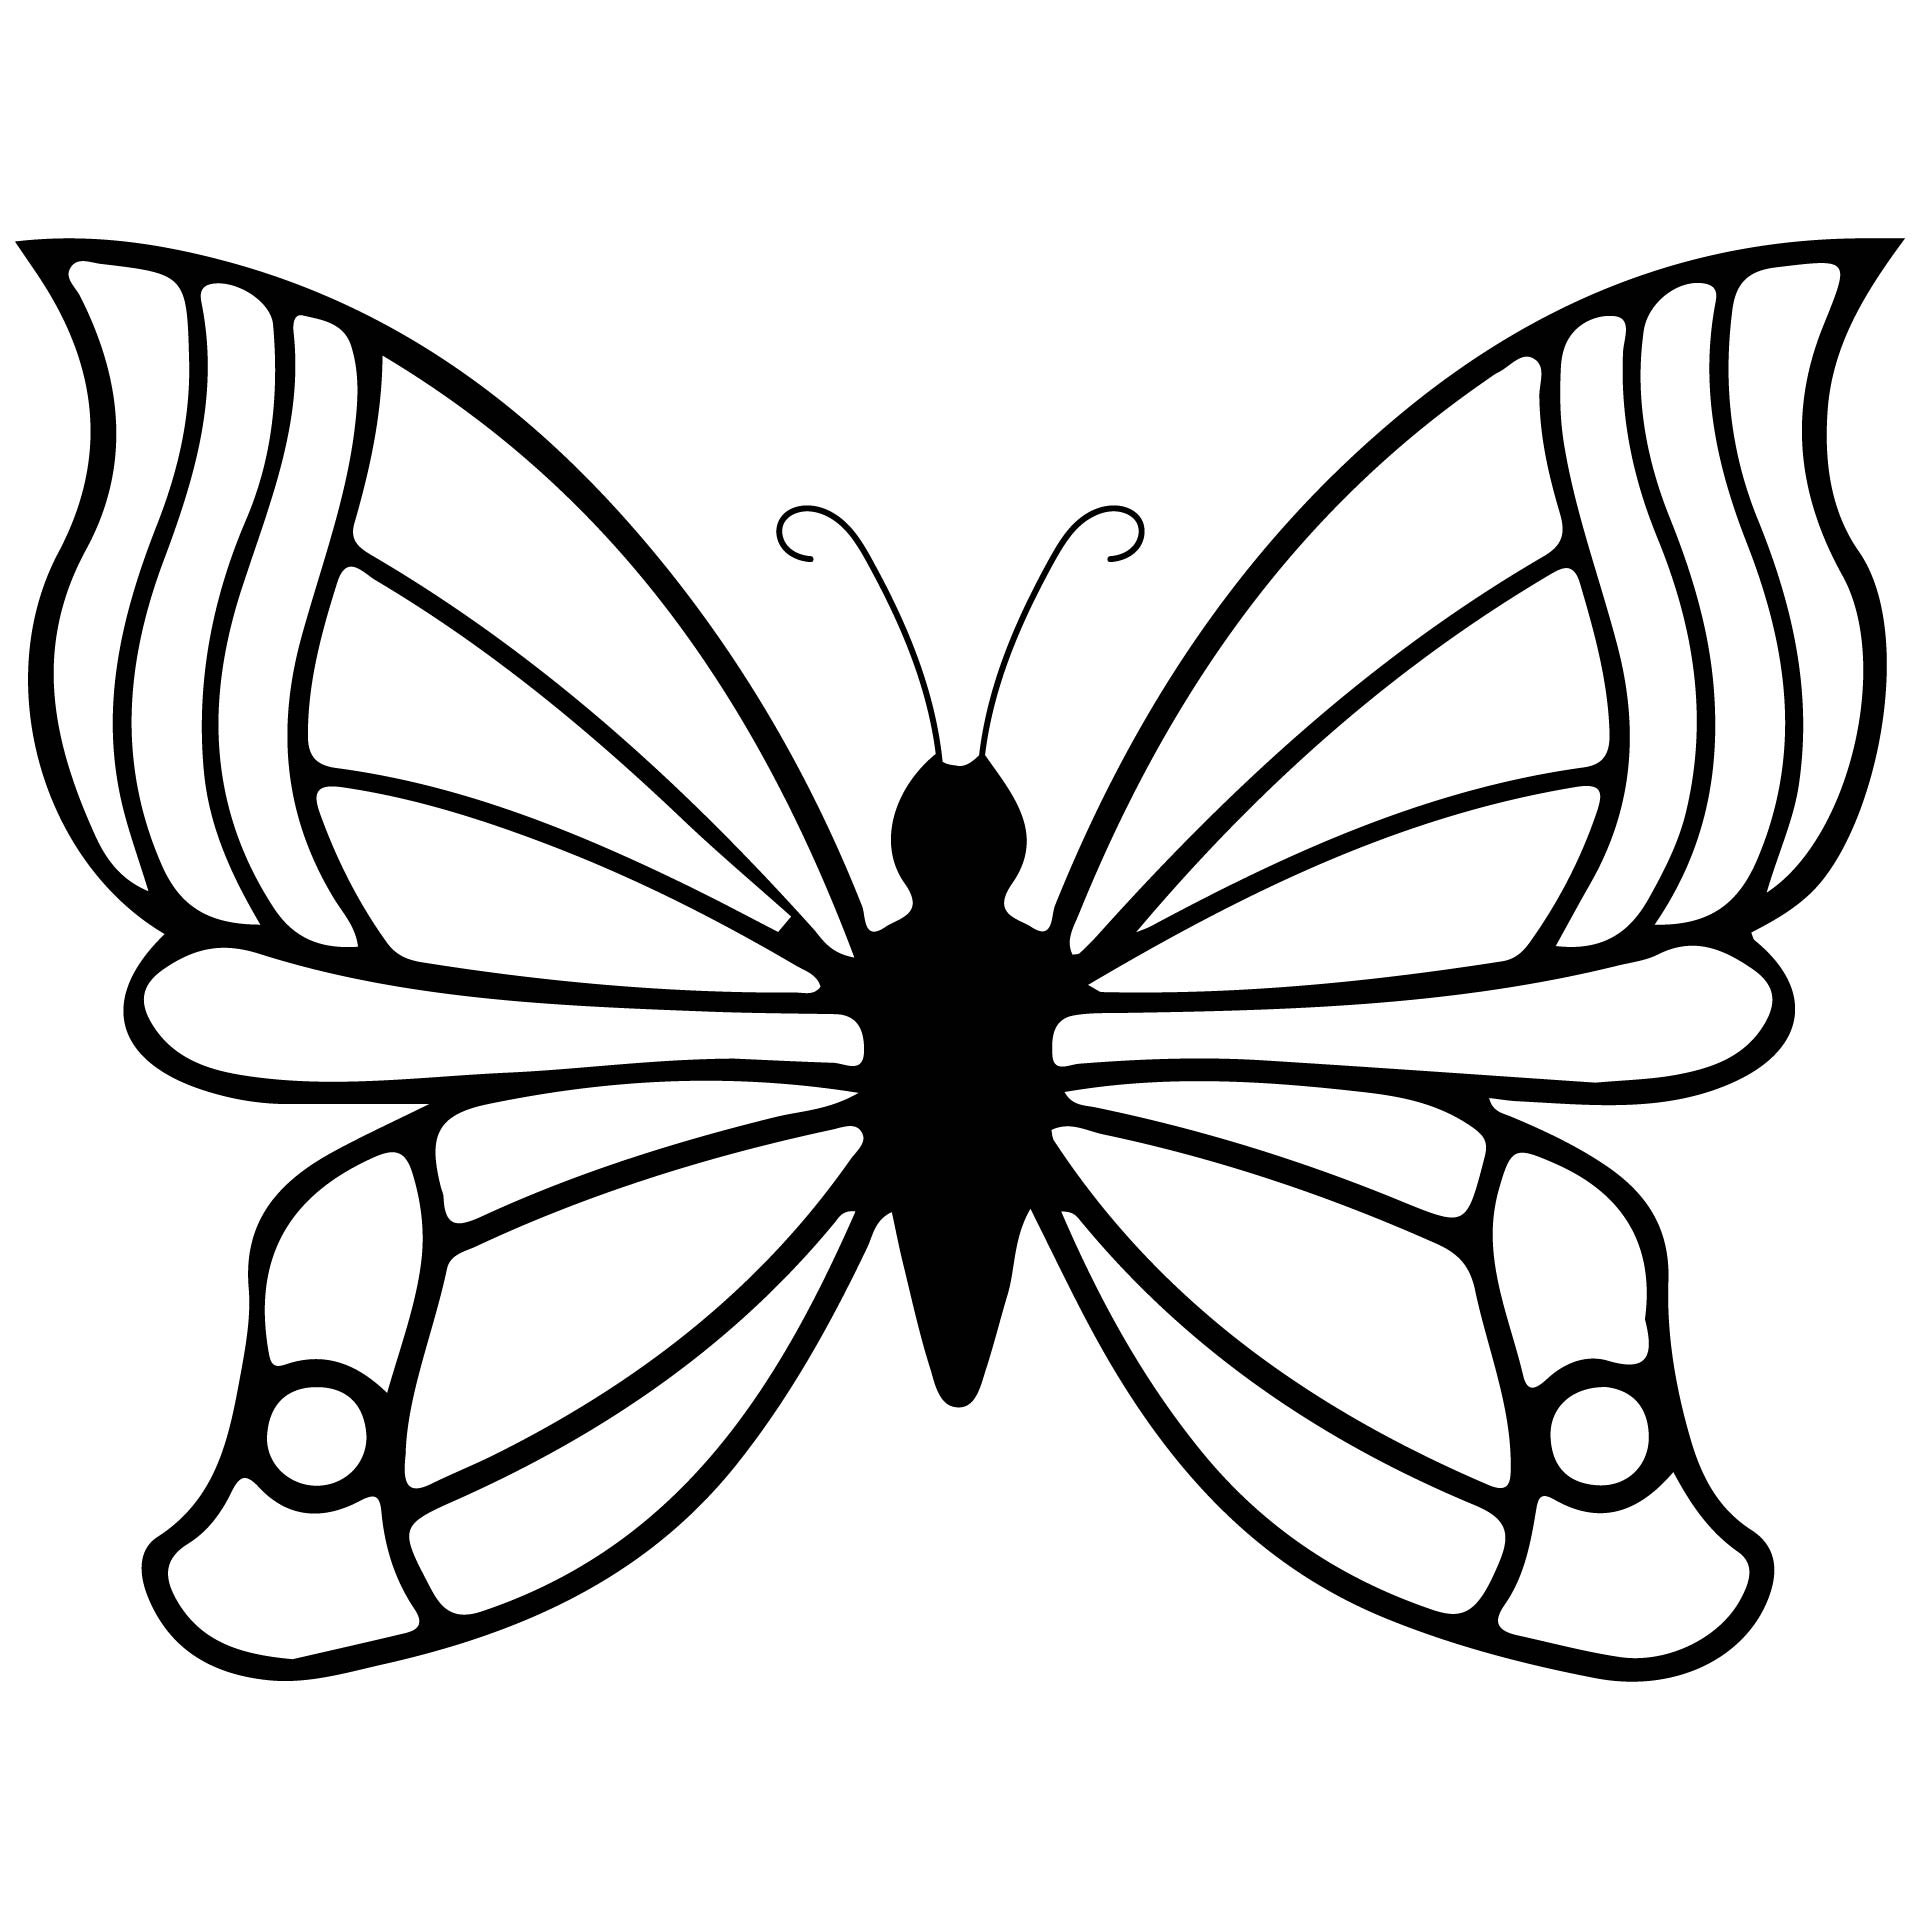 Butterfly Template Printable Free - Free Printable Templates